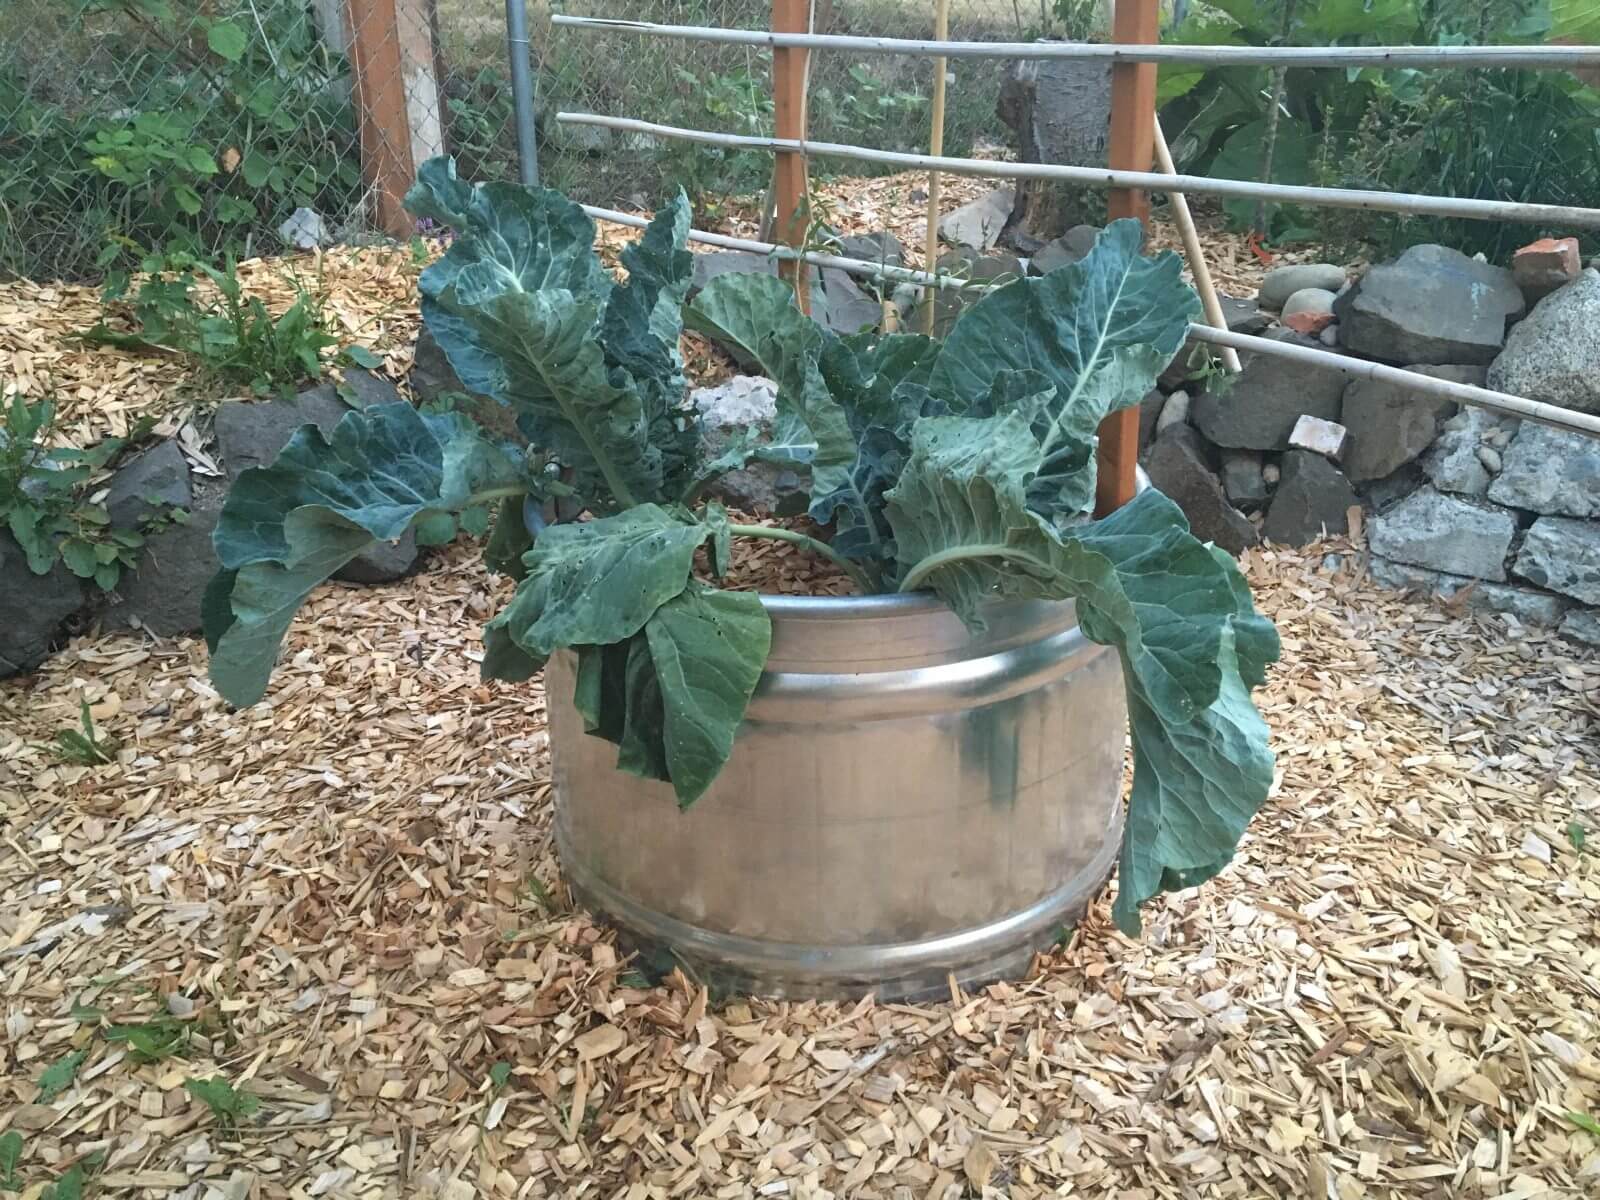 Circular planter in my yard planted with 2 cauliflower plants & there's a goji berry hiding in the back.